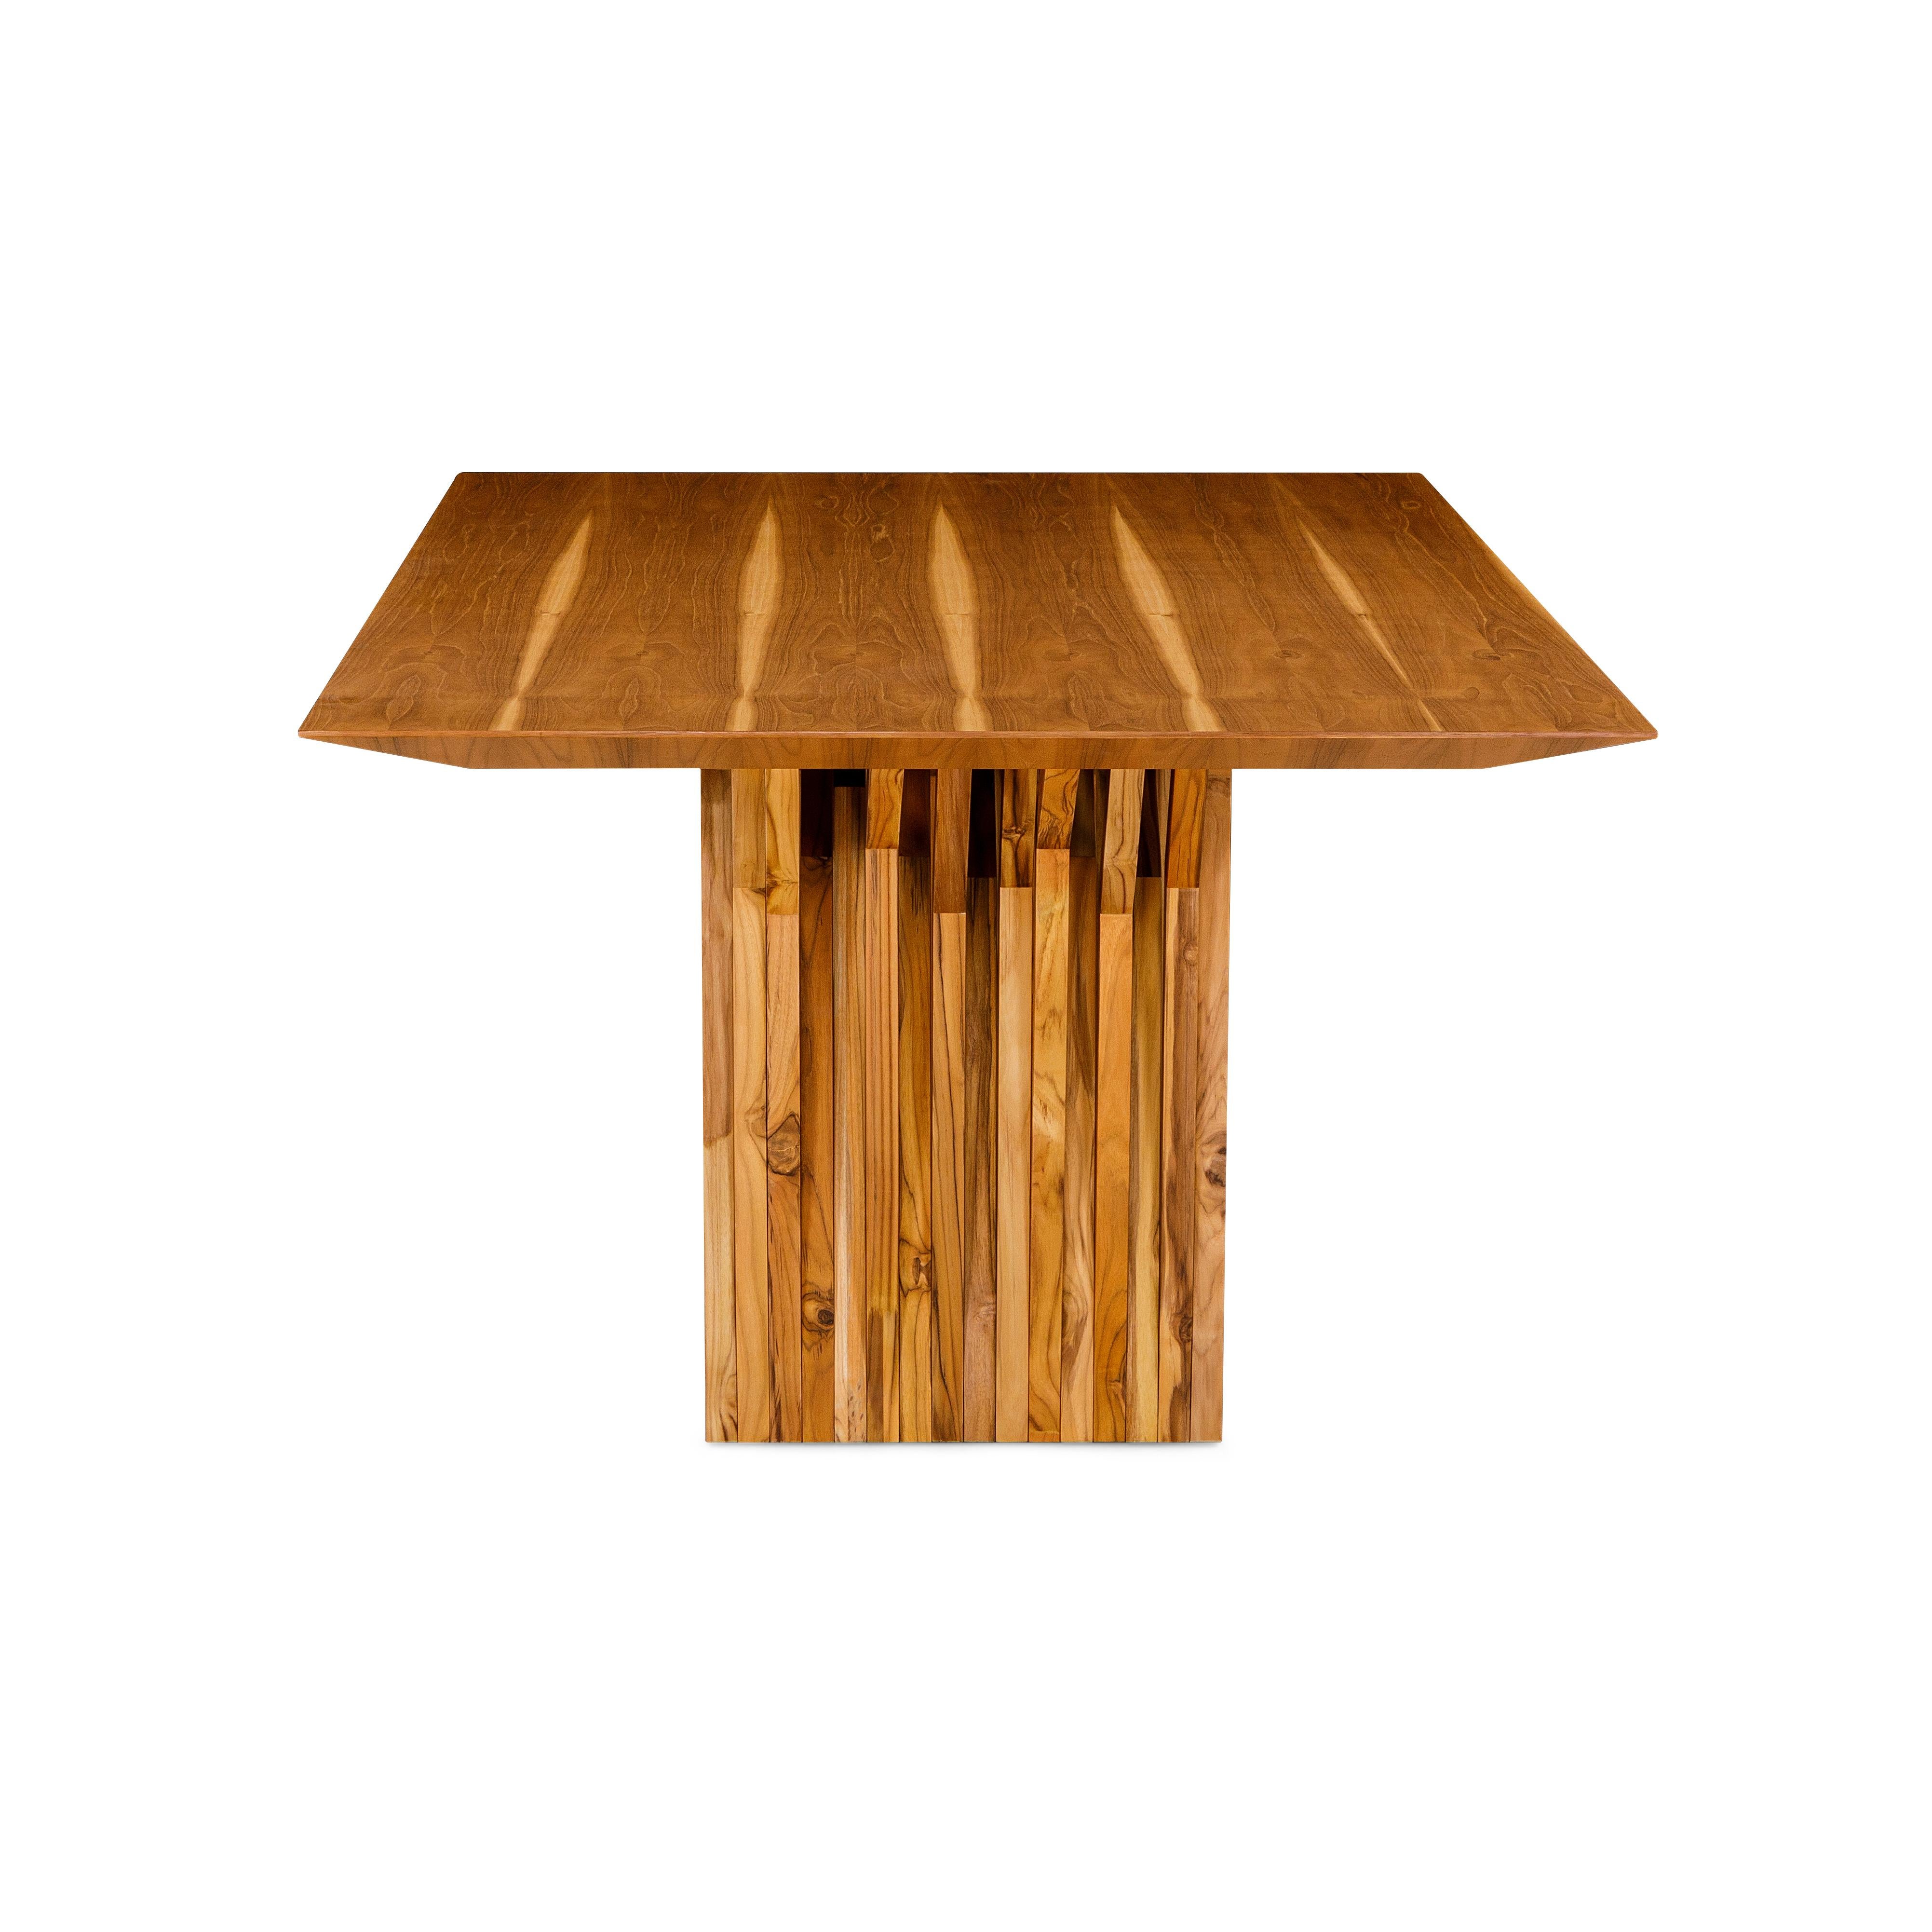 Brazilian Radi Dining Table with a Teak Wood Veneered Table Top 78'' For Sale